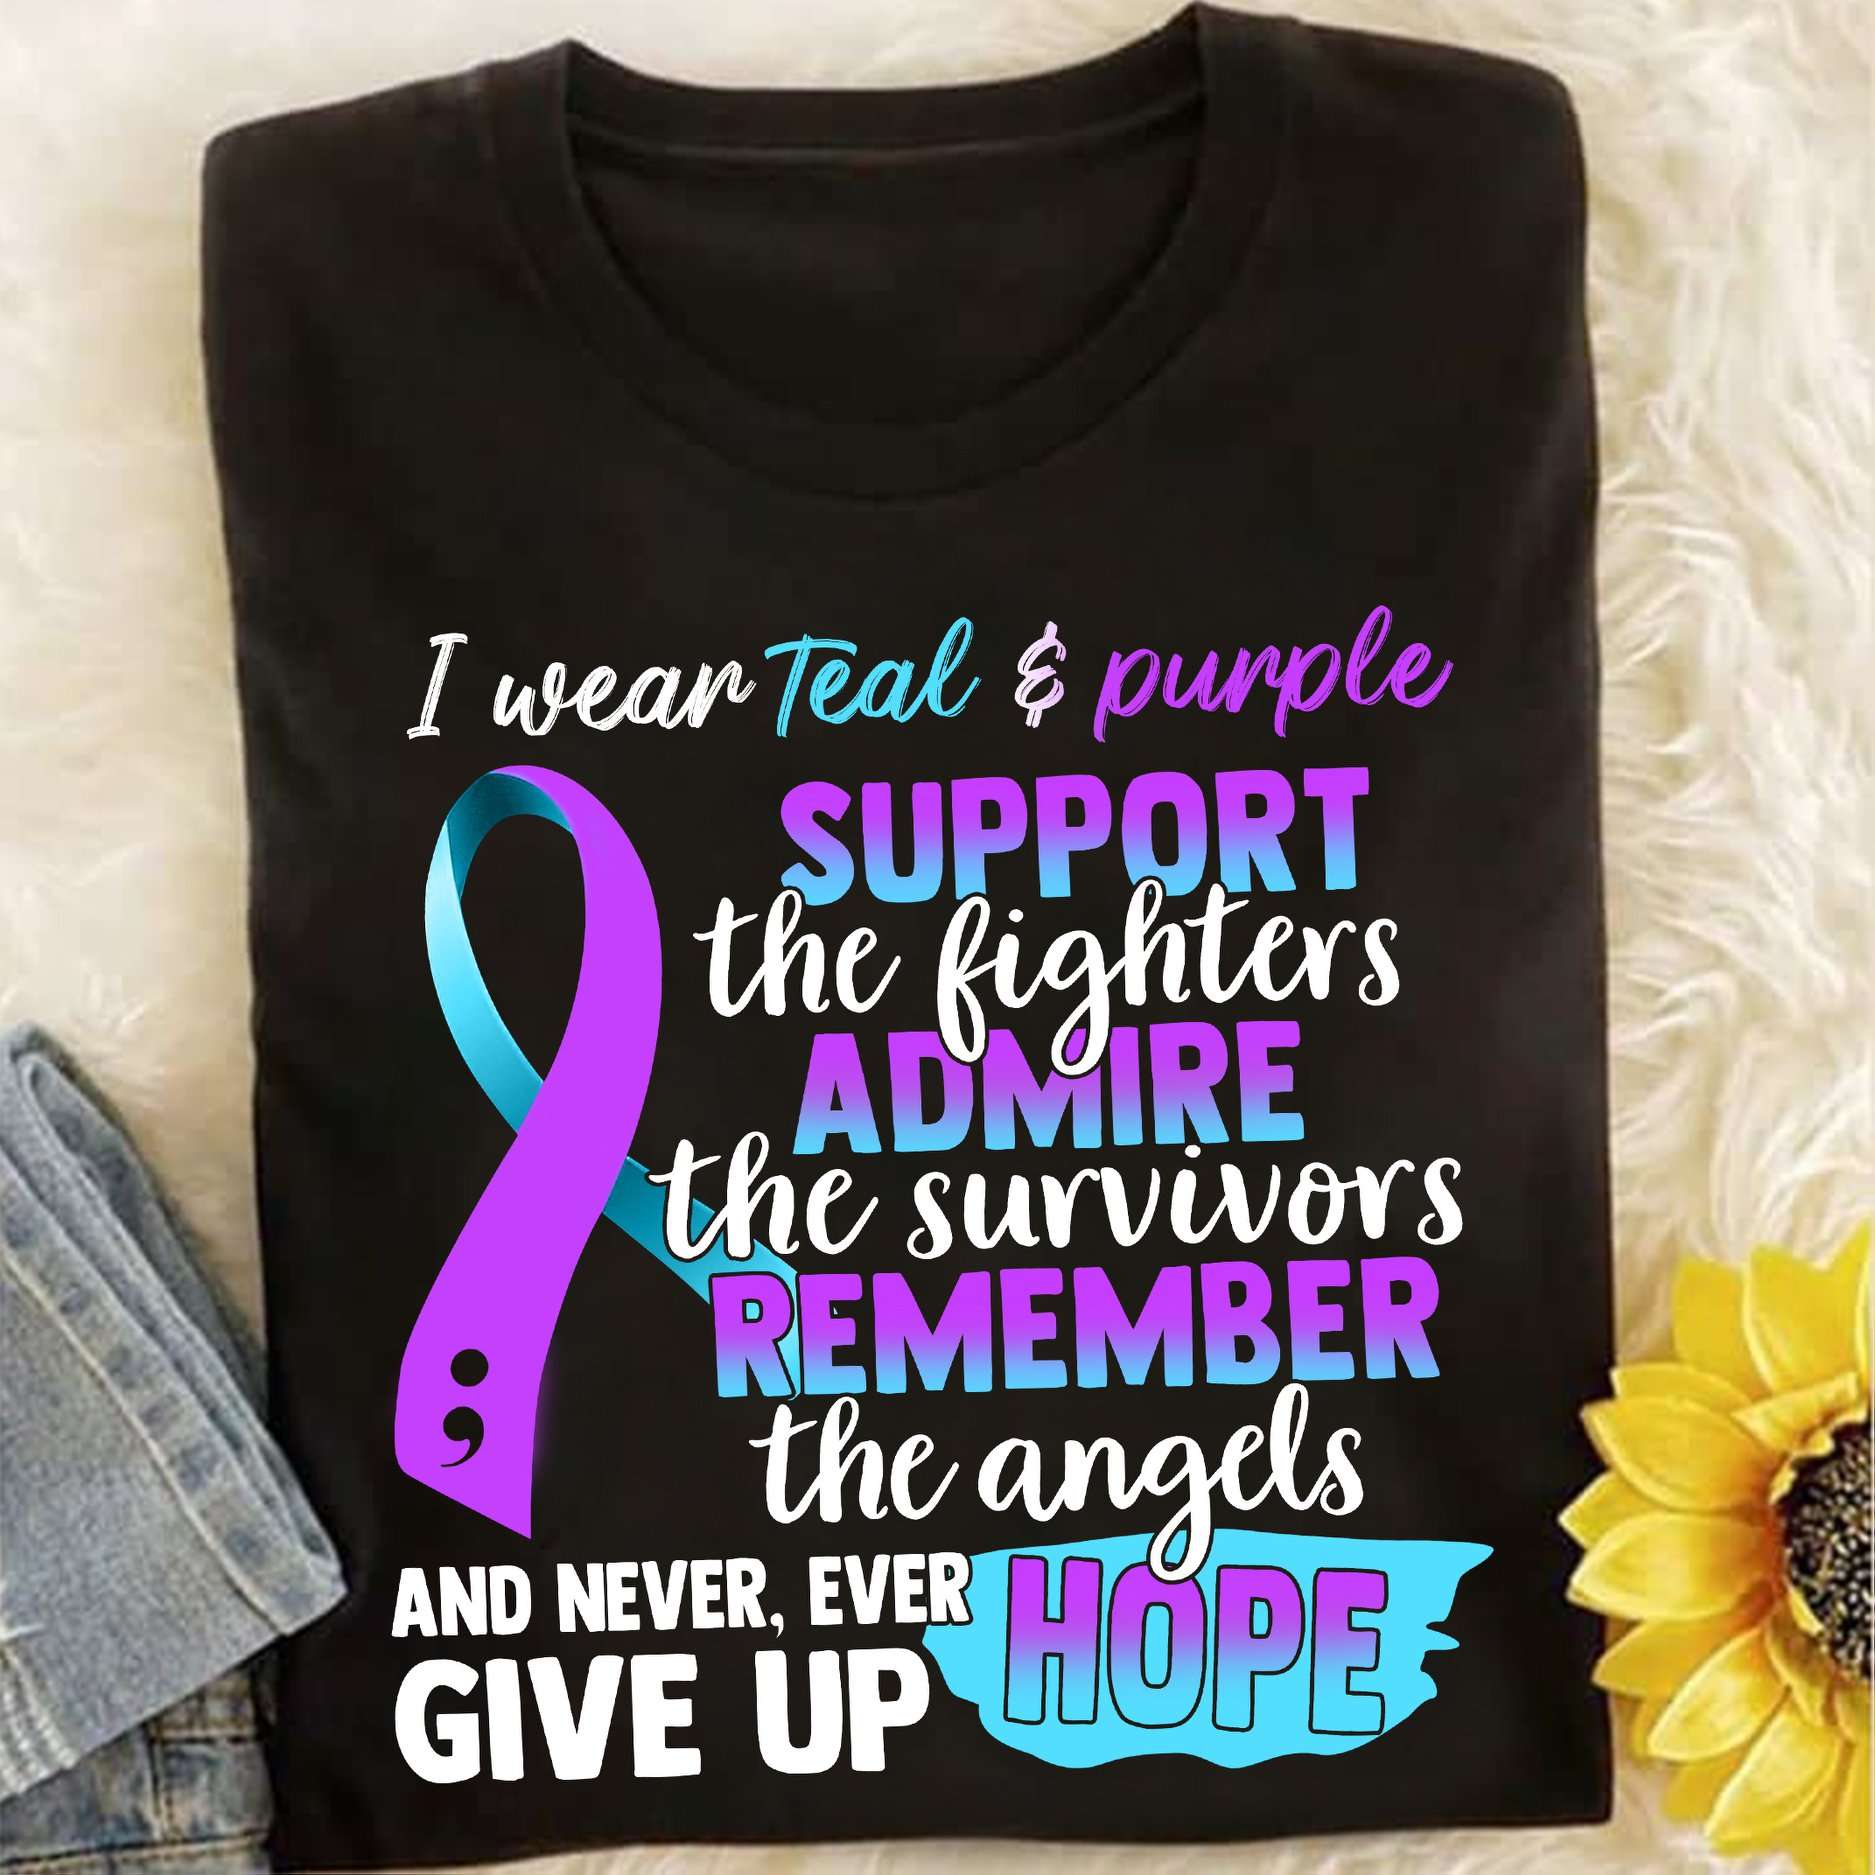 I wear teal and purple support the fighters admire the survivors, remember the angels - suicide prevention awareness